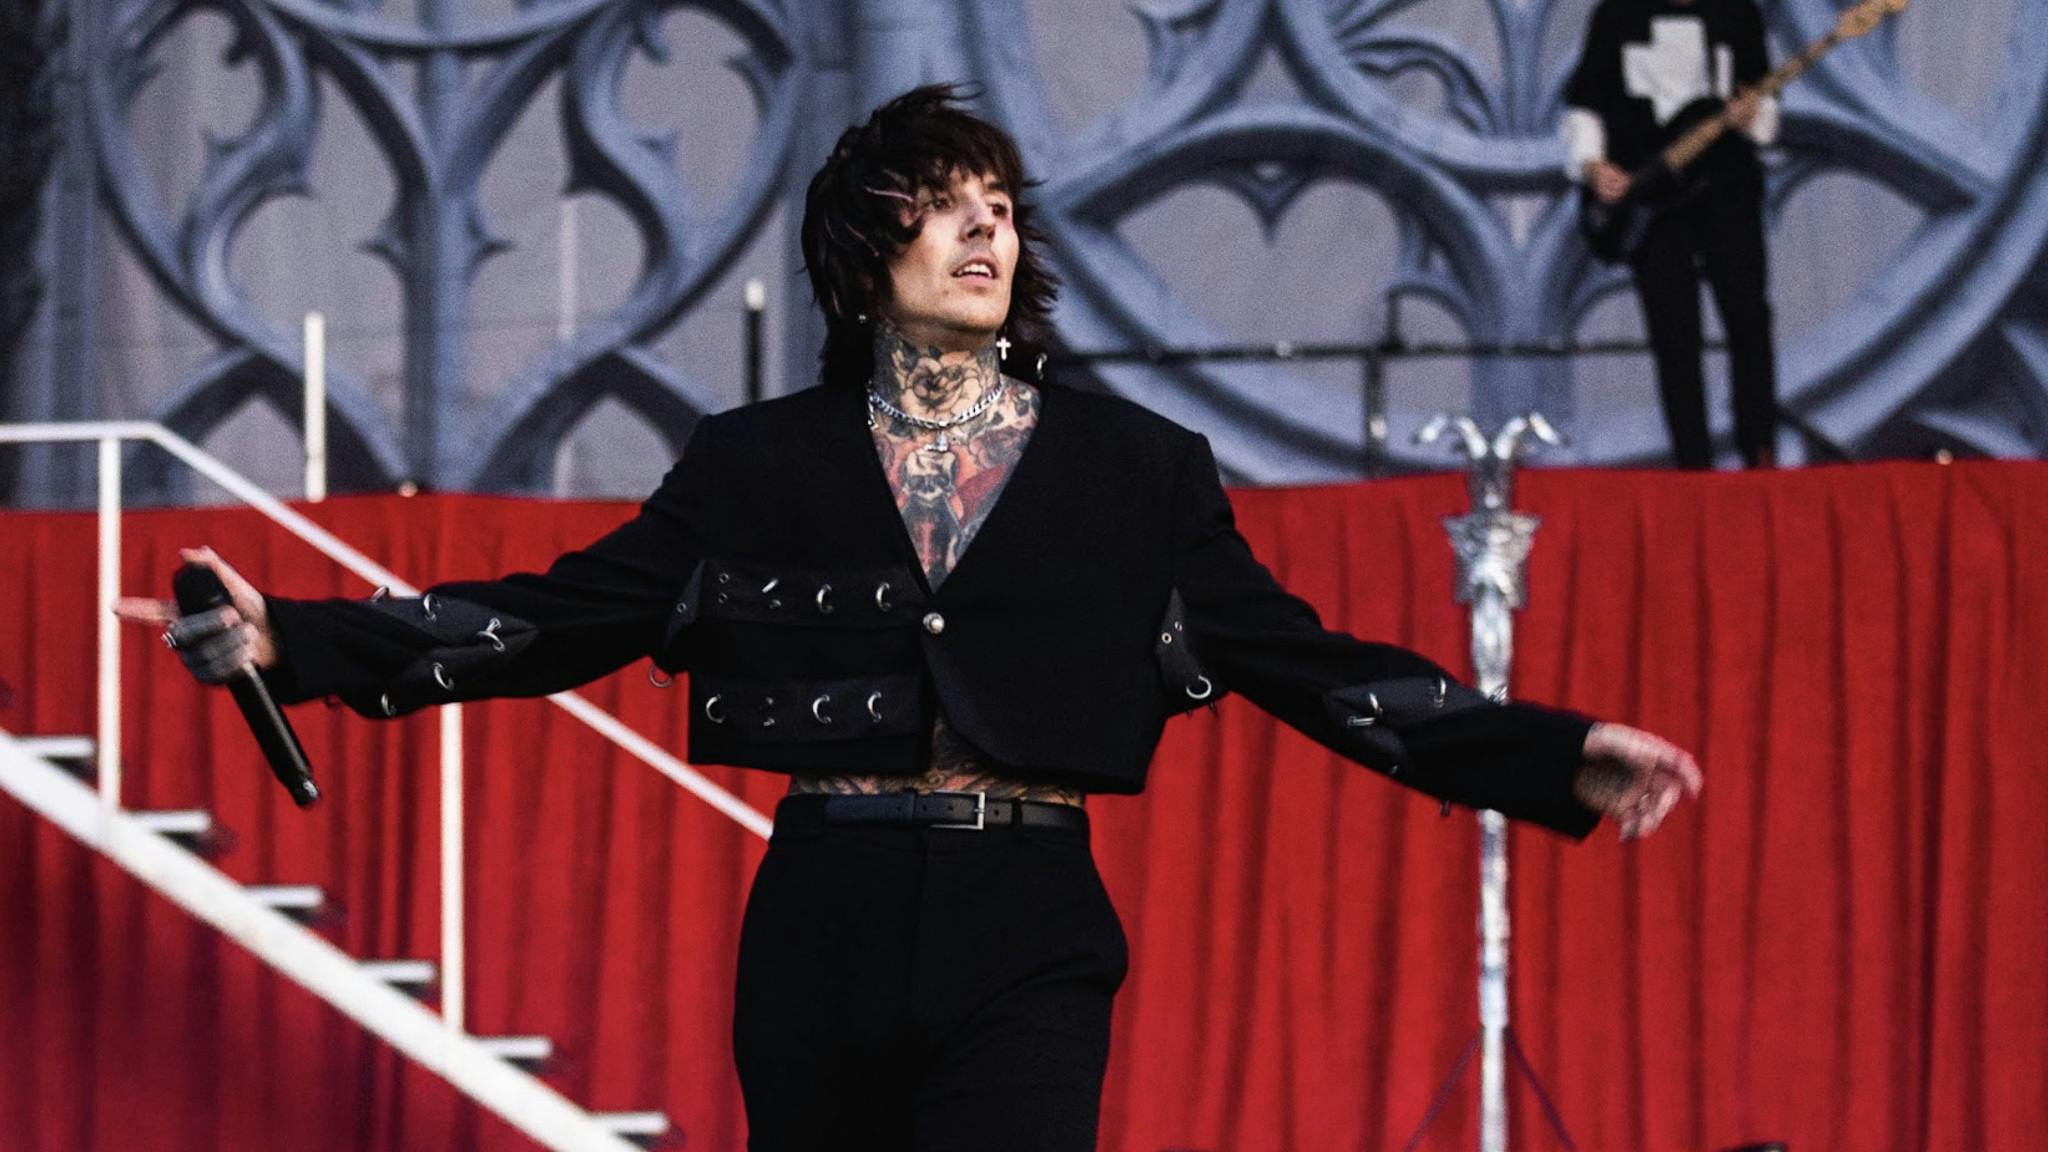 BMTH, QOTSA and more to play Transylvania’s 24-hour music festival, Electric Castle